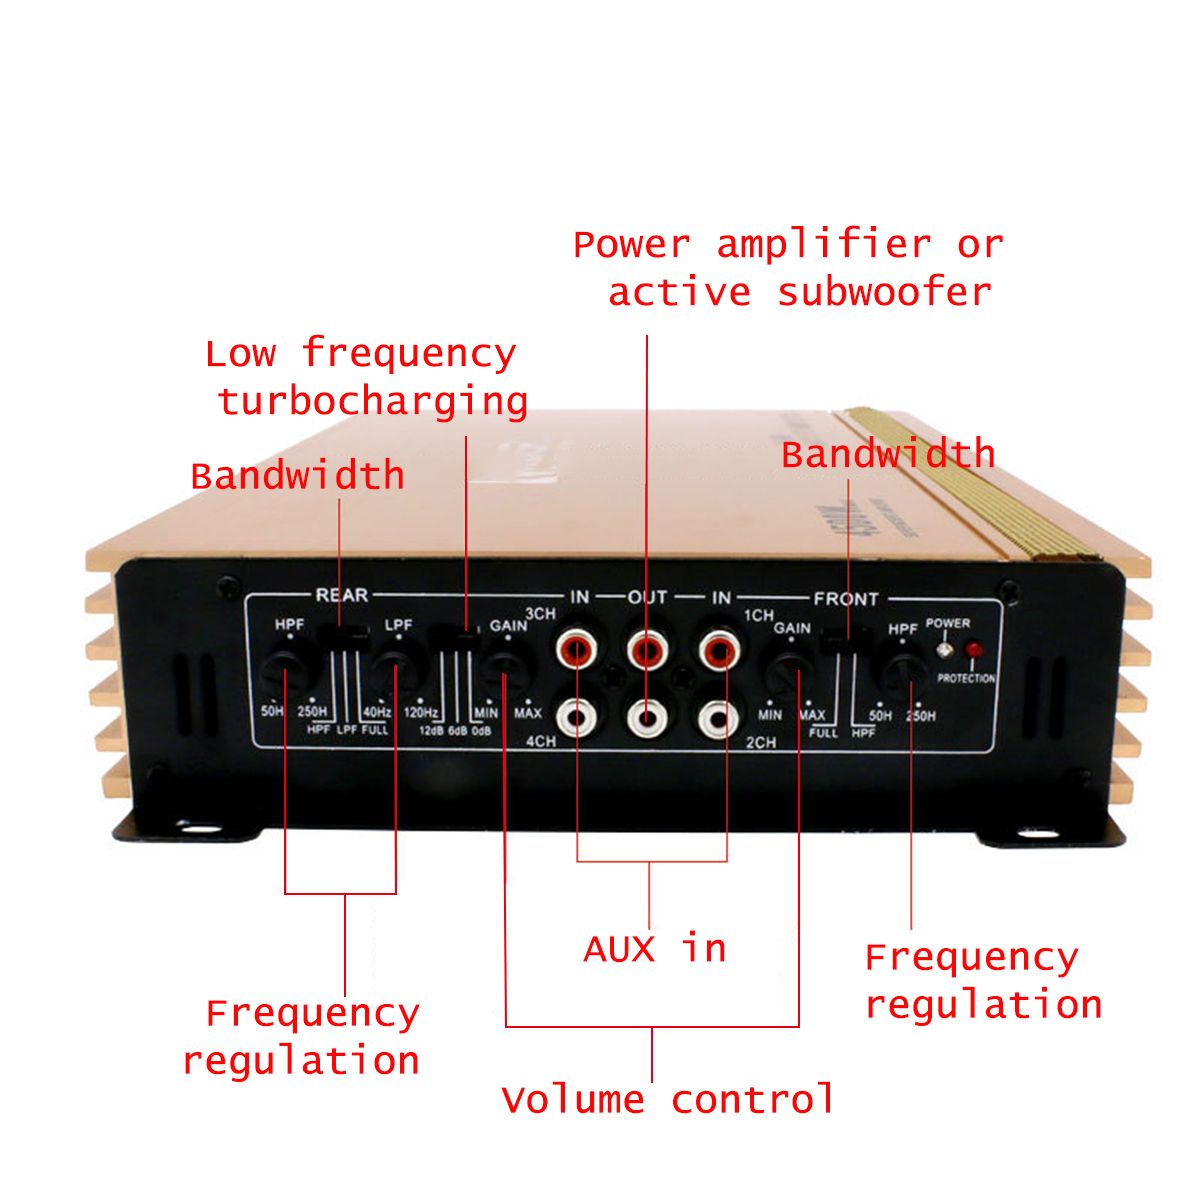 4-Channel-4Omega-4500W-High-Power-Car-Amplifier-Stereo-Surround-Sound-Fidelity-Aluminum-Alloy-1391700